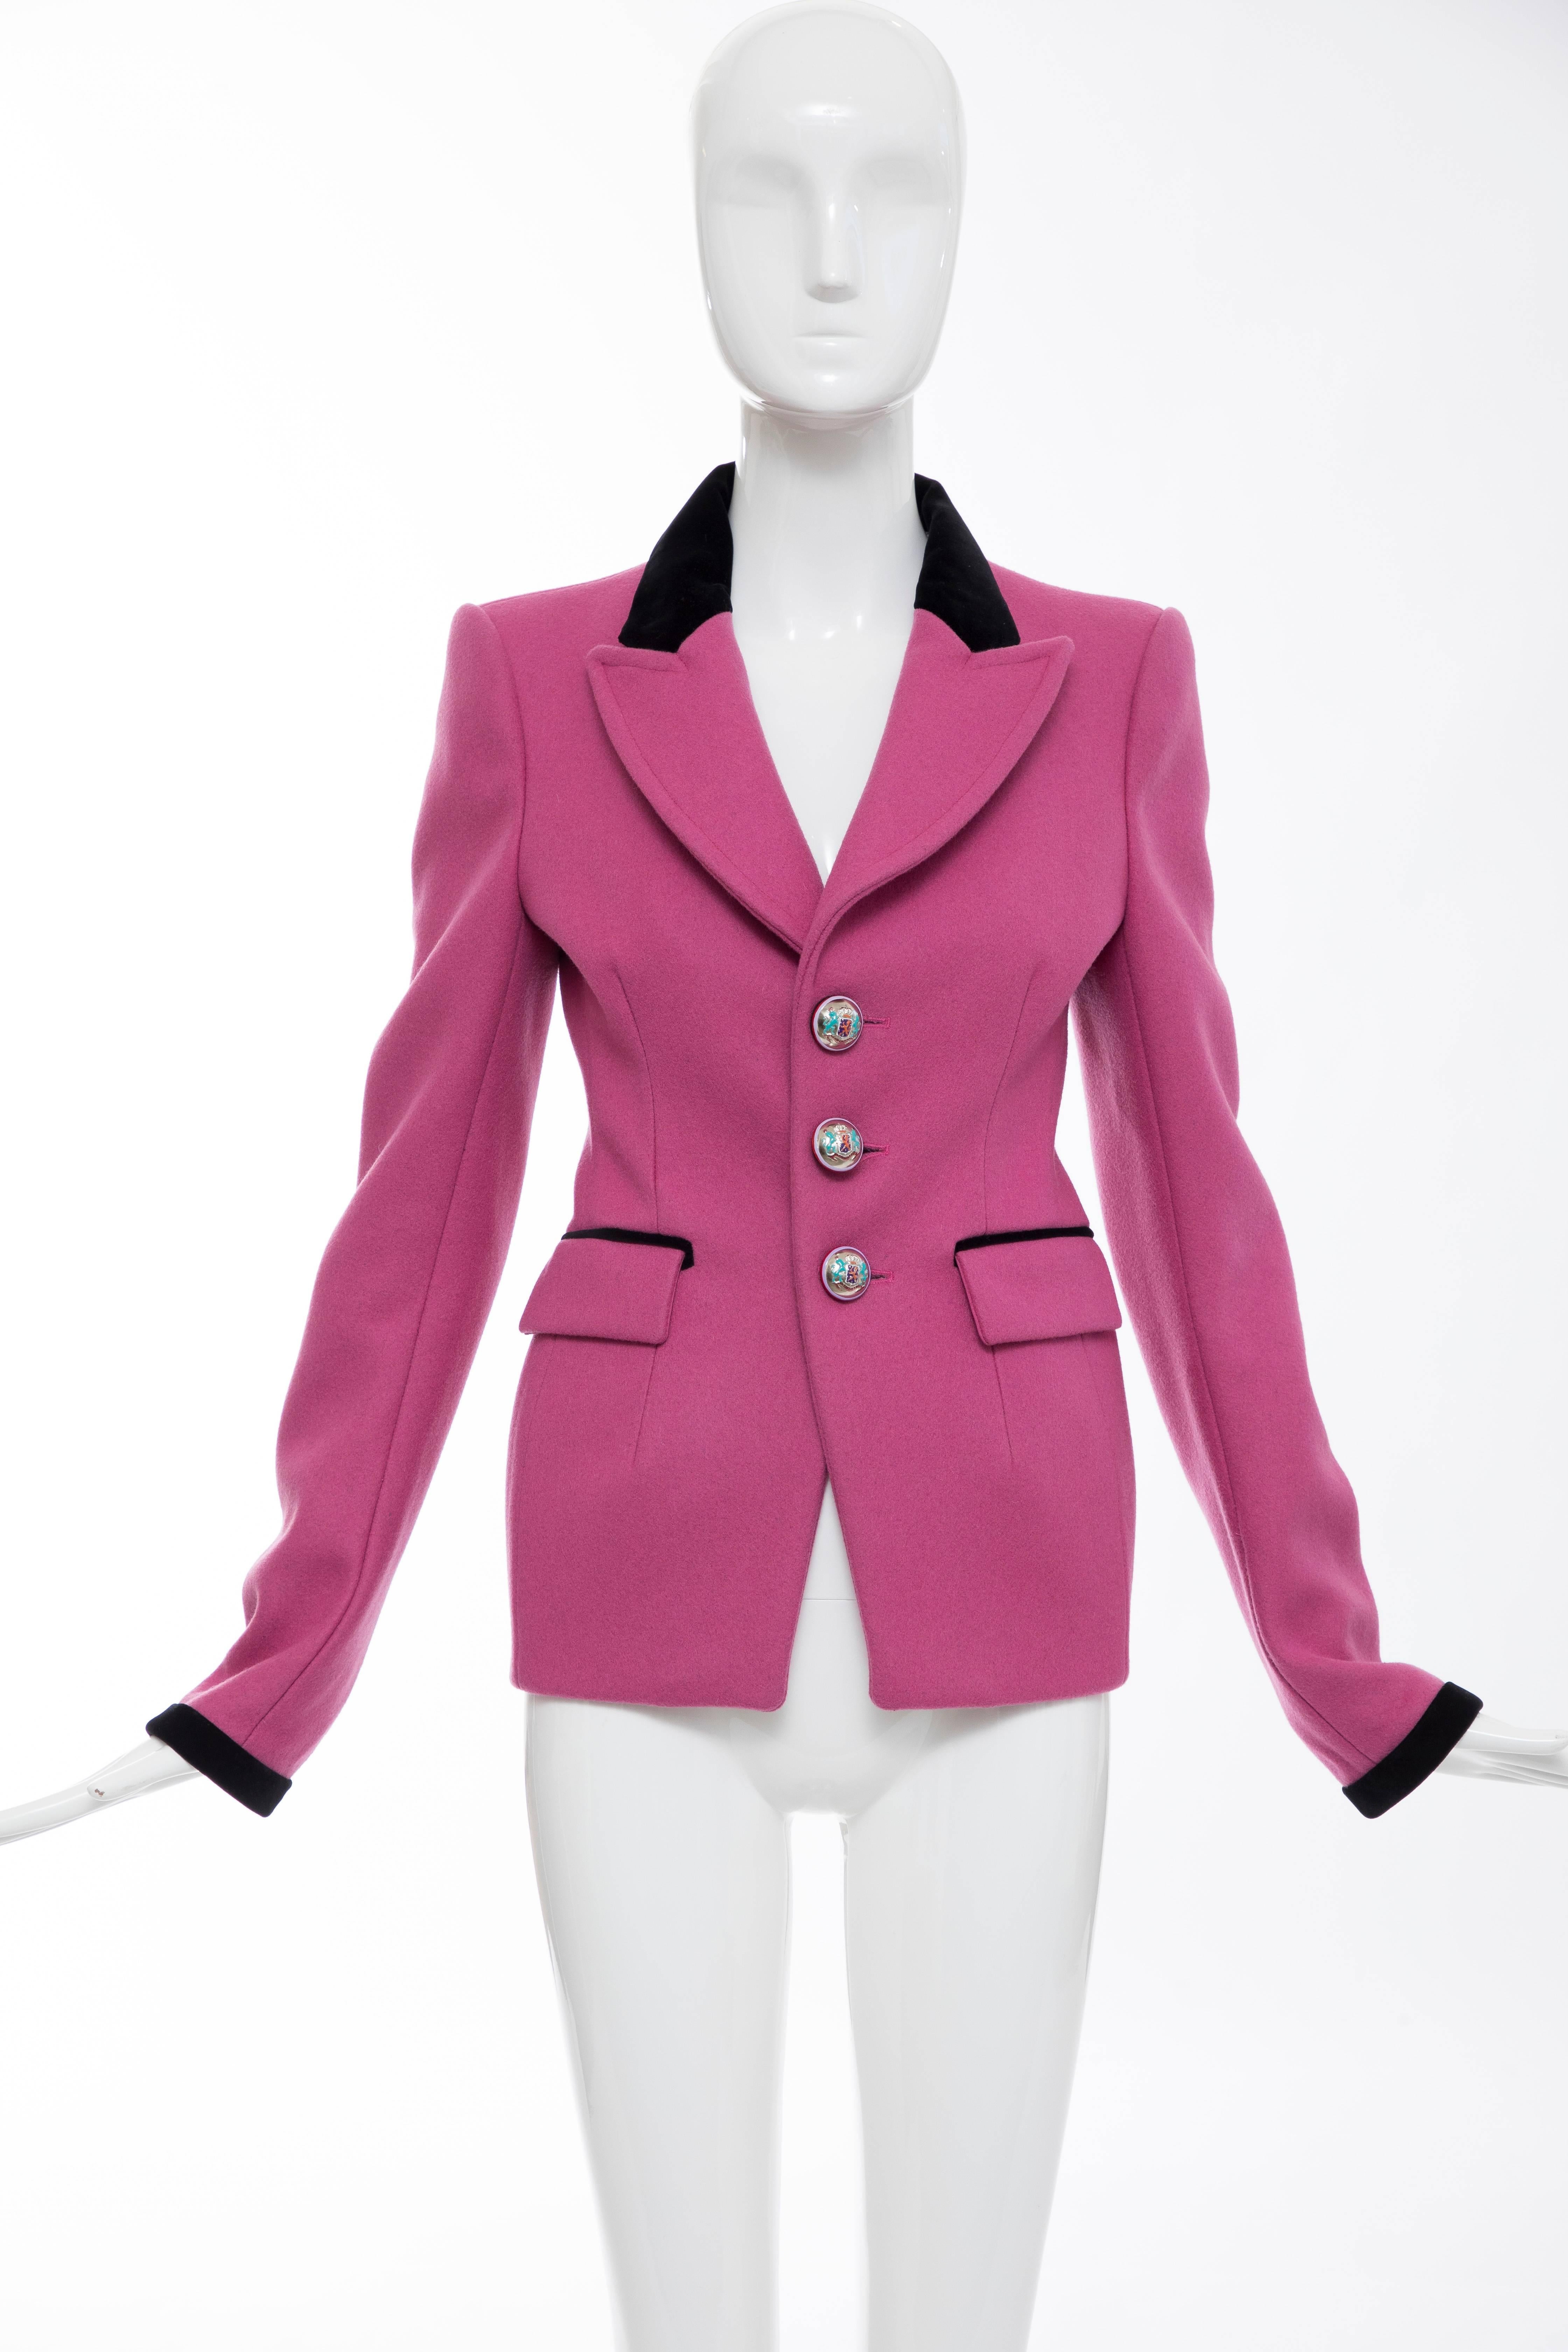 Balenciaga by Nicolas Ghesquière, Autumn-Winter 2007, runway pink structured wool blazer with notched lapel featuring black velvet trim, dual flap pockets at waist, black velvet trim at cuffs and enameled button closures.

FR. 38
US. 6

100%